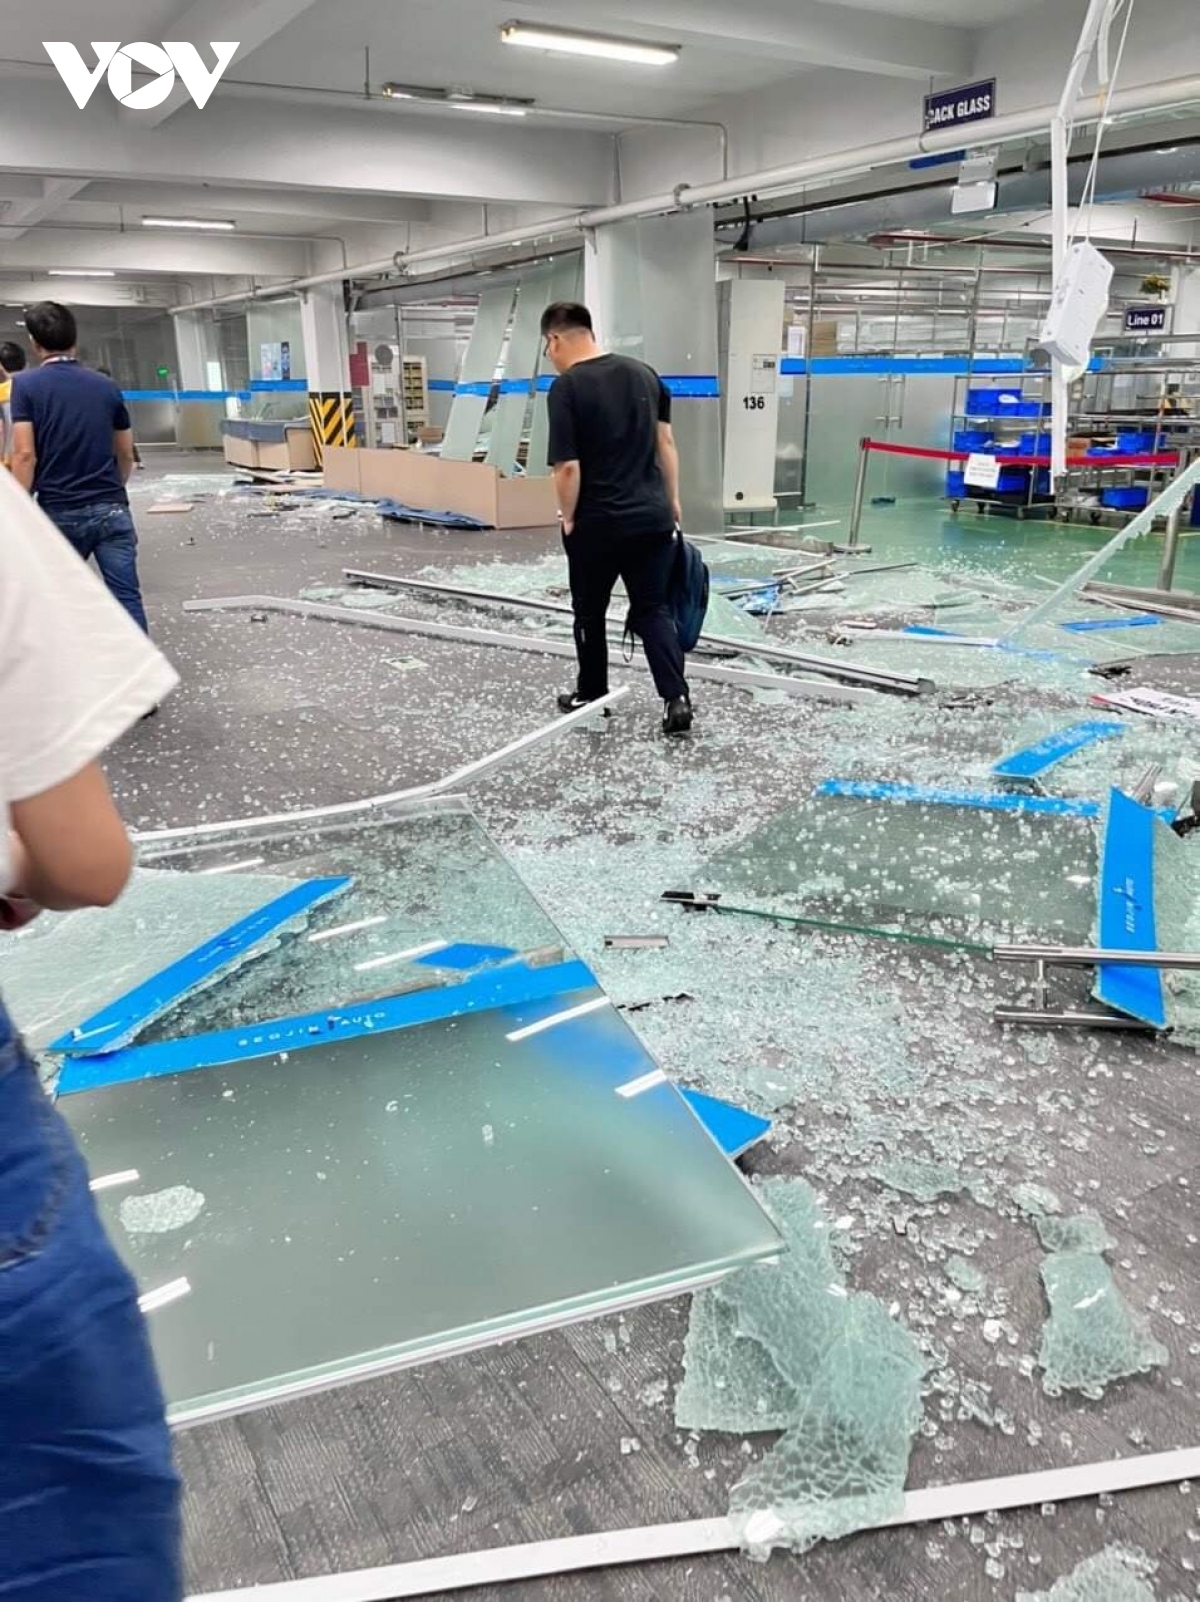 bac ninh gas pipe explosion injures 34 workers picture 5